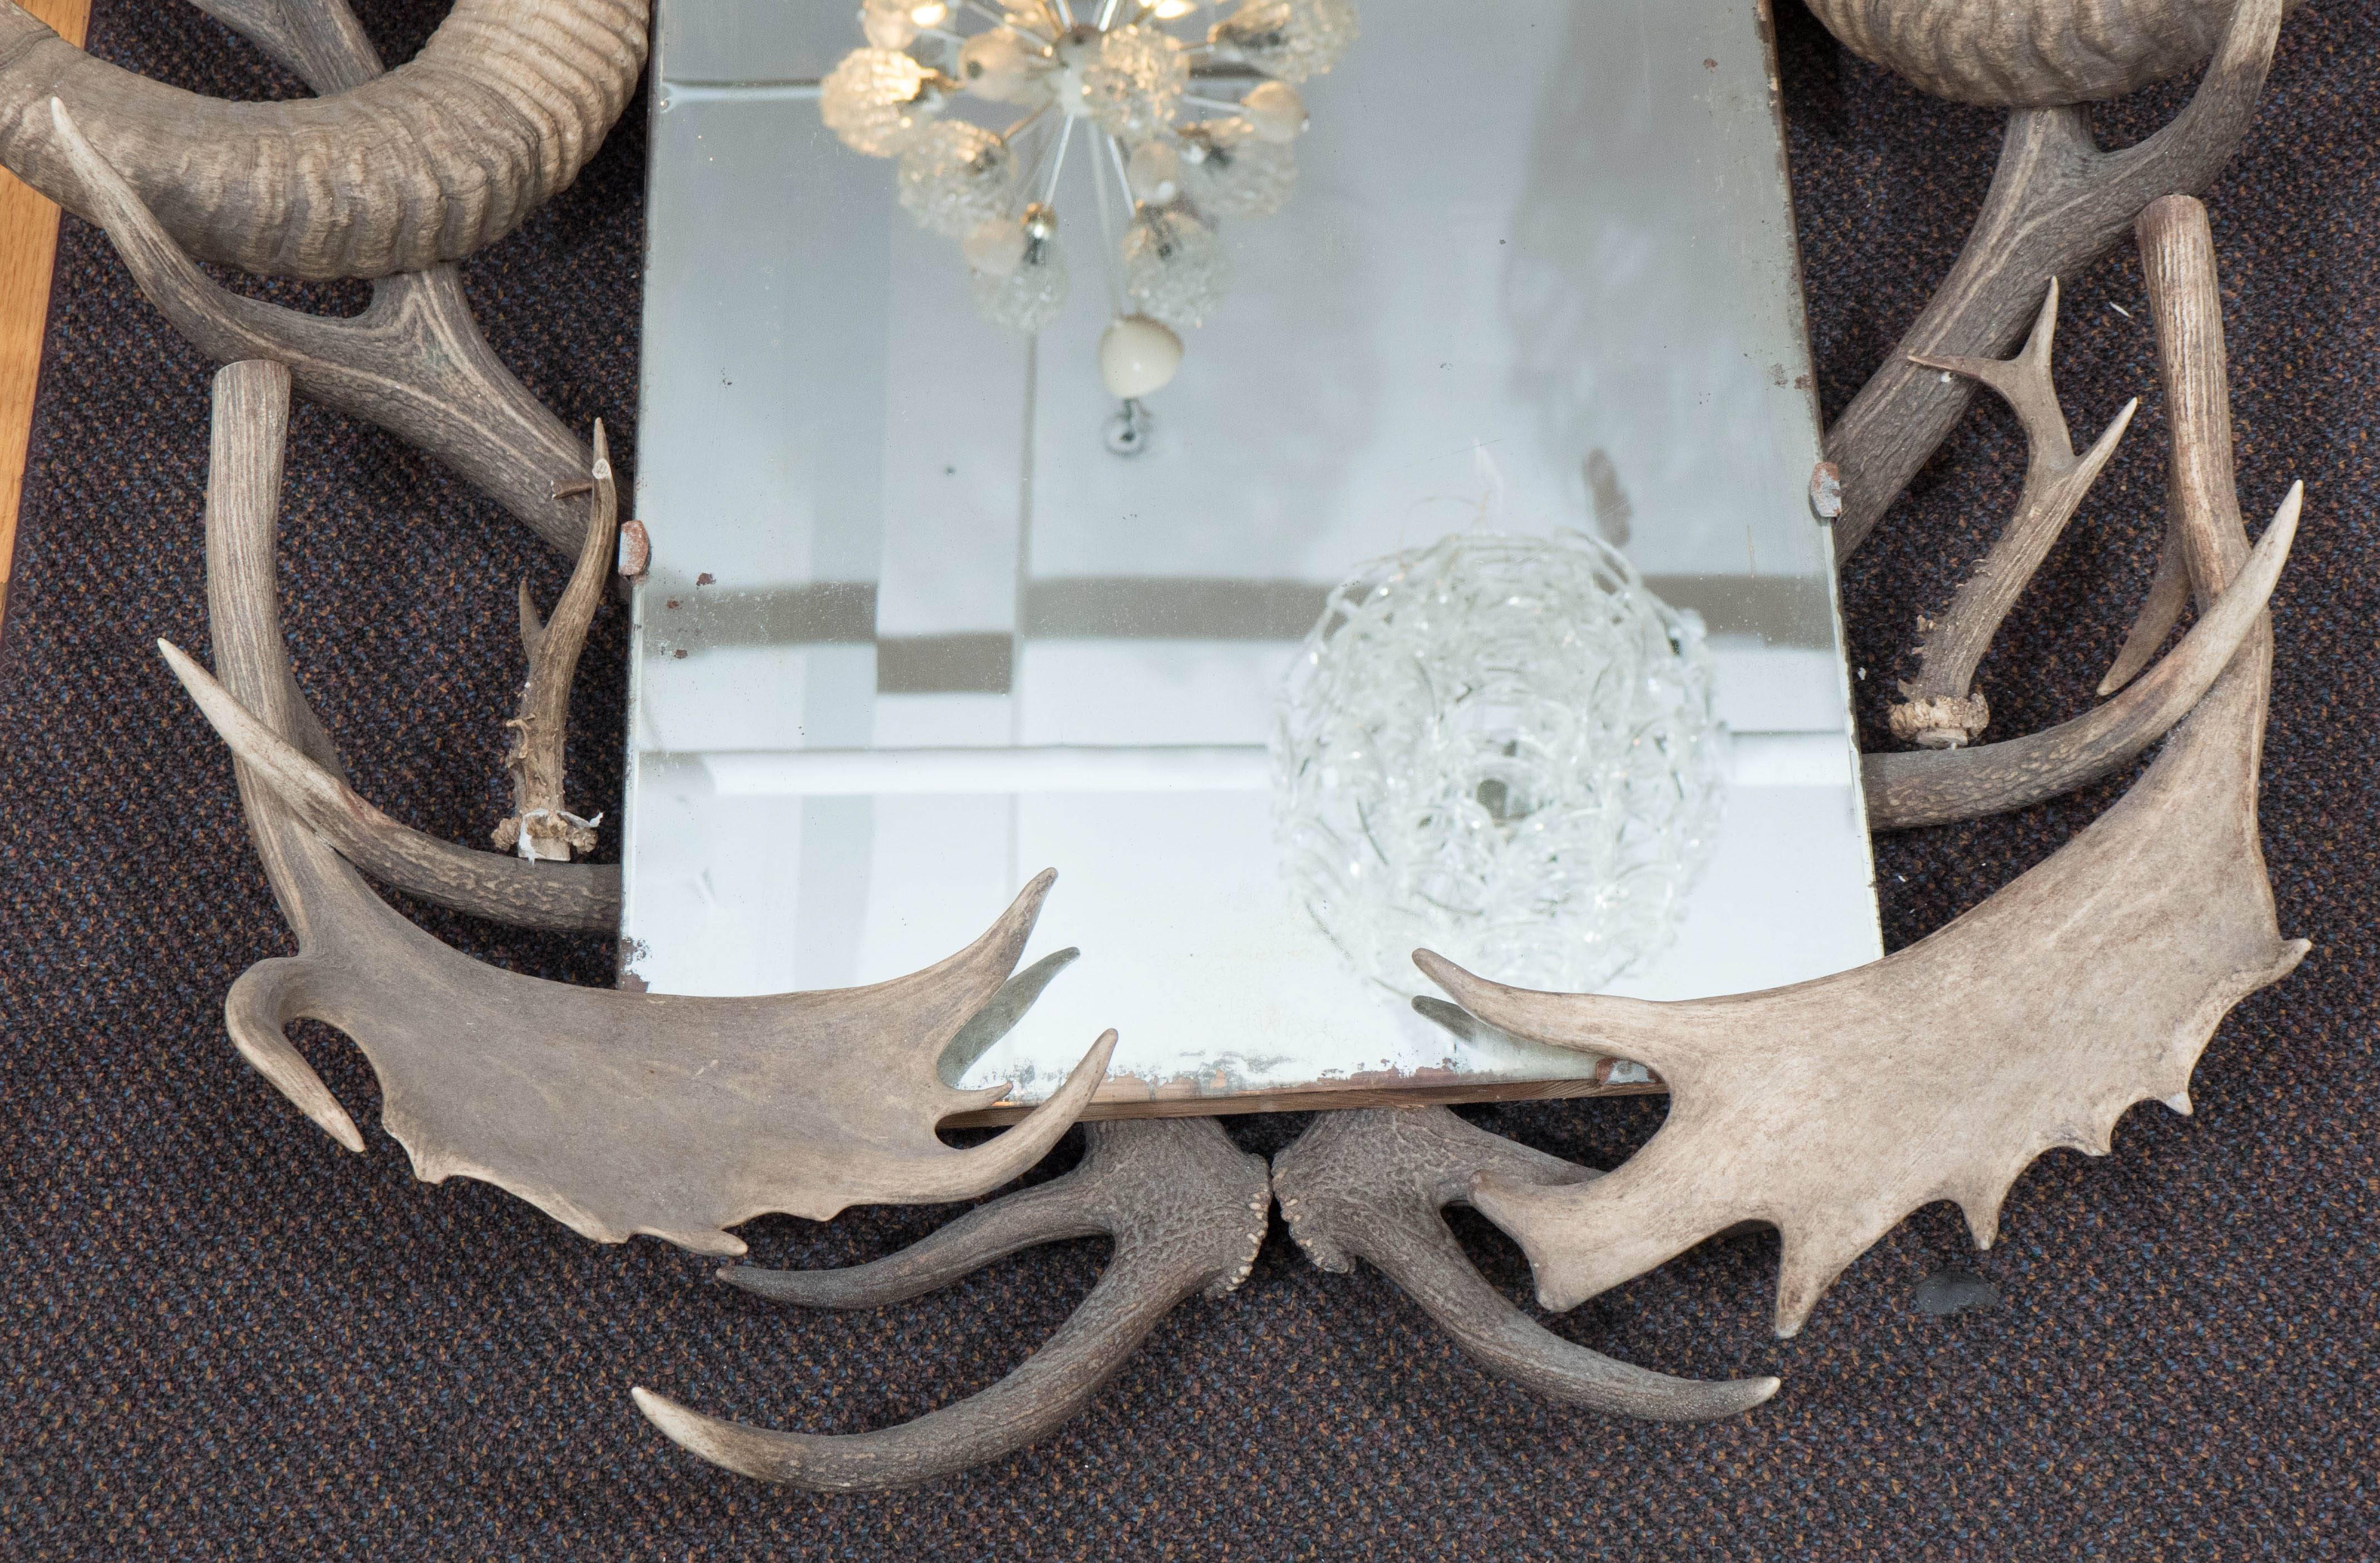 An early 20th century lengthy wall mirror, framed by an array of animal horns and antlers, affixed to a wood base, with rope suspension. Overall good vintage condition, with age appropriate wear to the hardware and slight warping, minor silvering